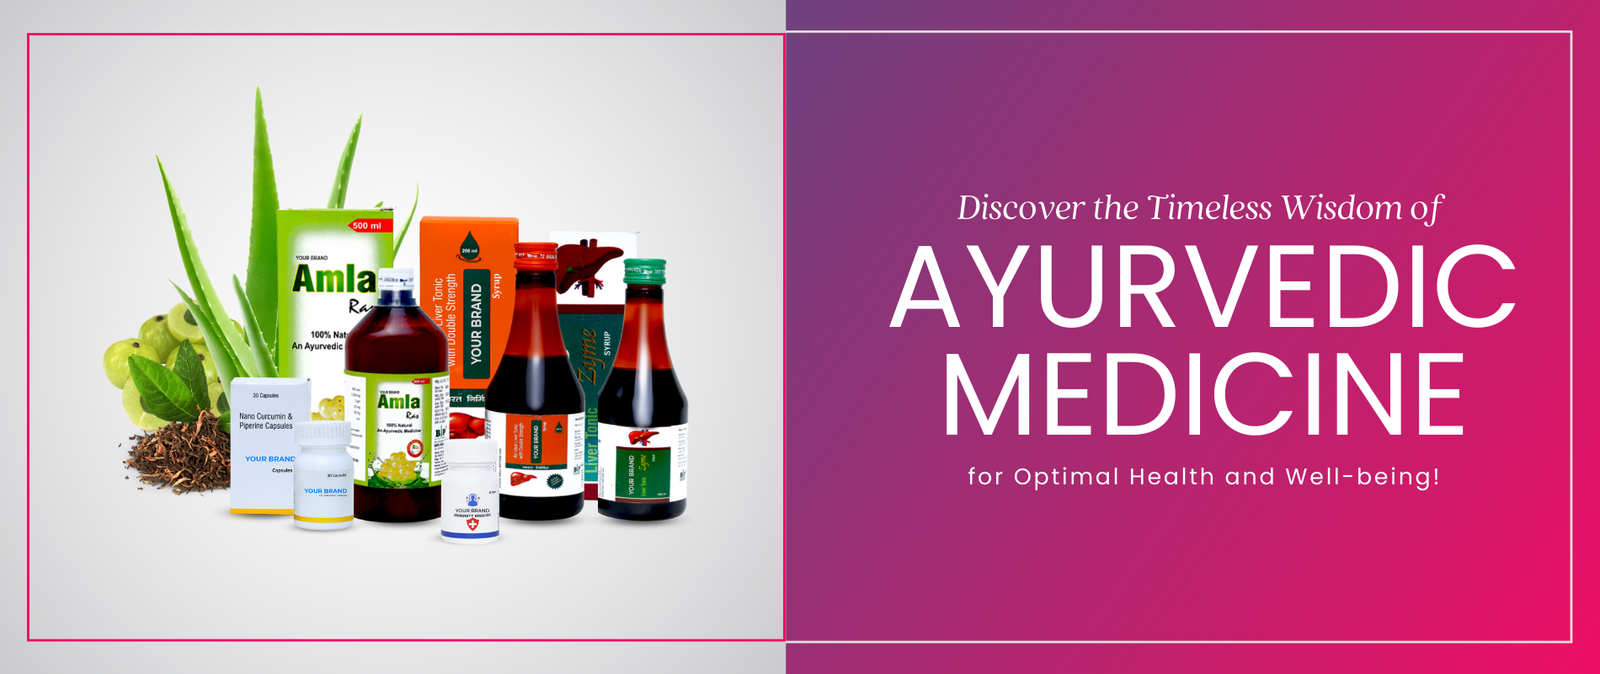 Ayurvedic Medicines Manufacturer & Suppliers Company in India